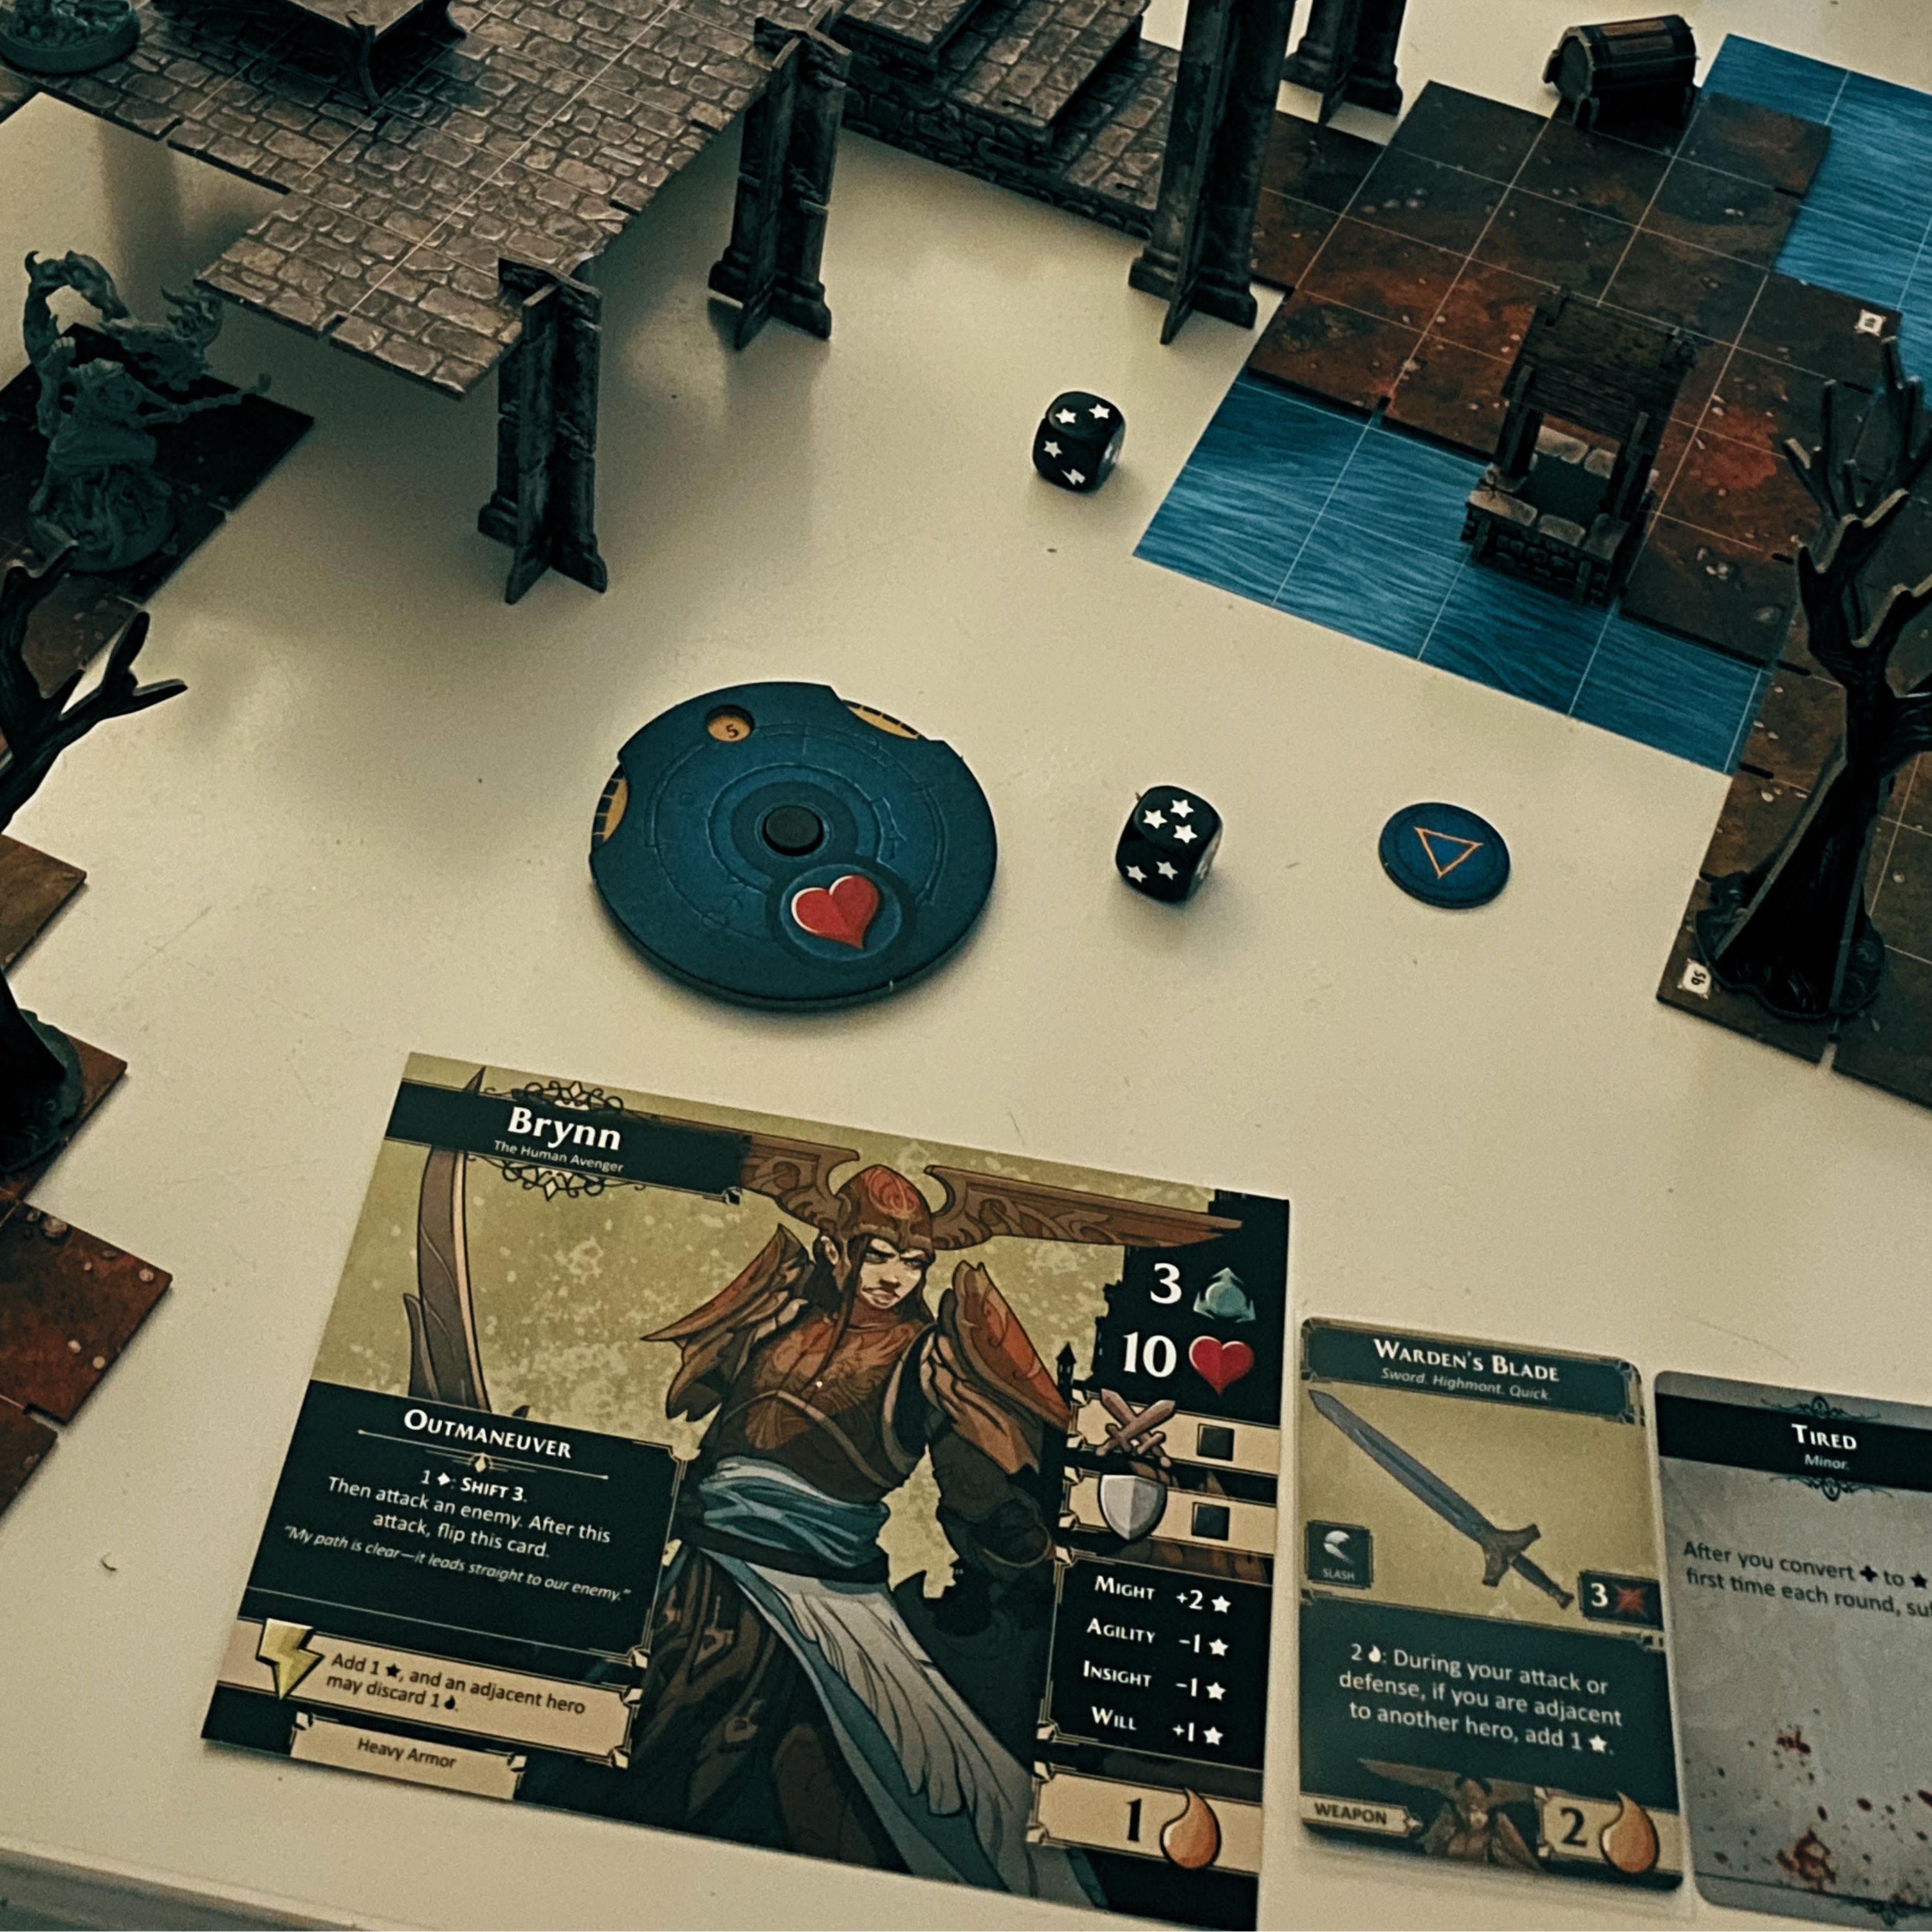 Photos of the Descent: Legends Of The Dark board game